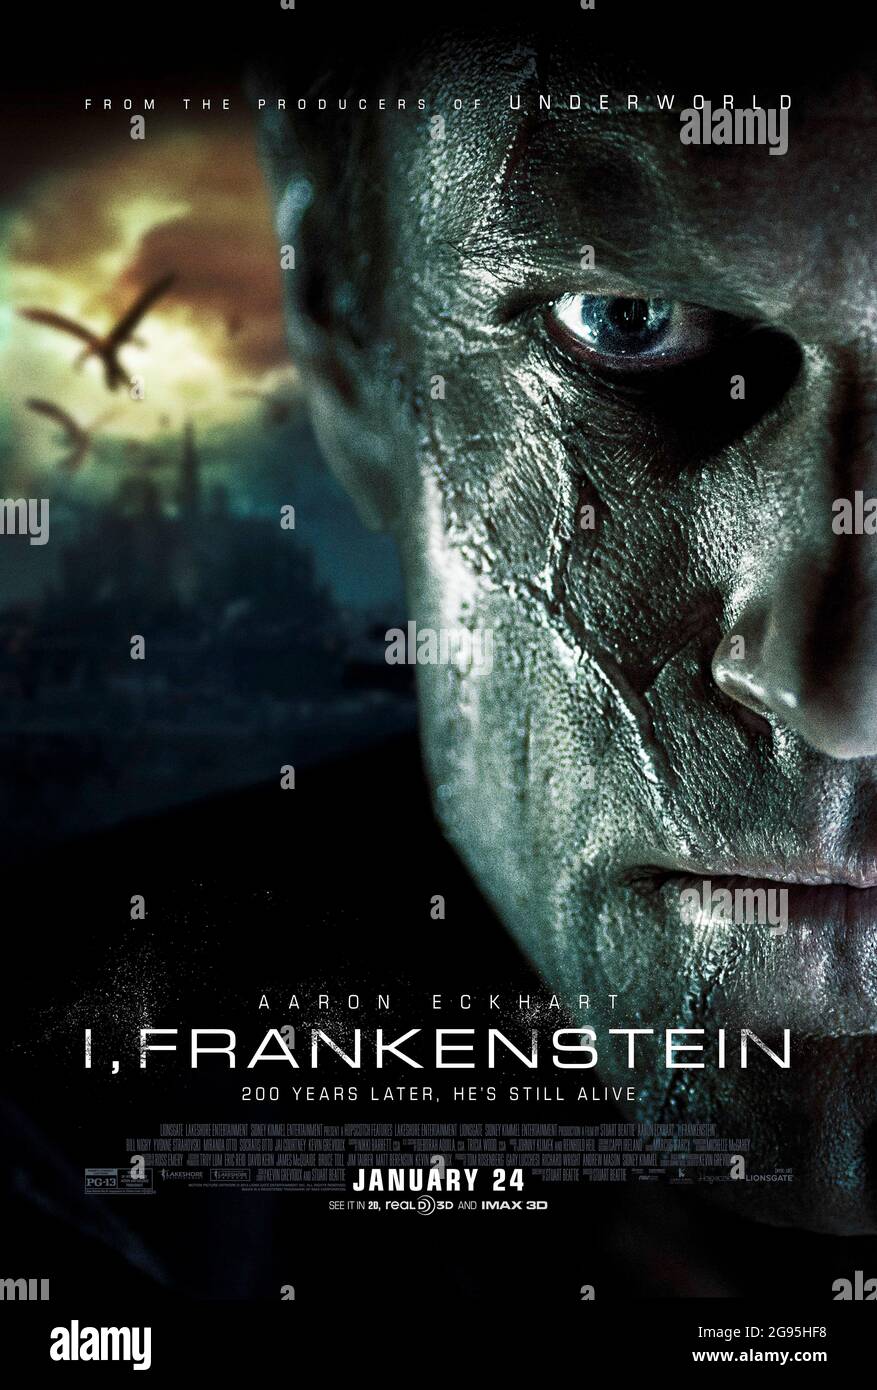 I, Frankenstein (2021) directed by Janell Shirtcliff and starring Aaron Eckhart, Bill Nighy and Miranda Otto. Frankenstein's creature finds himself caught in an all-out, centuries old war between two immortal clans of demons and gargoyles. Stock Photo